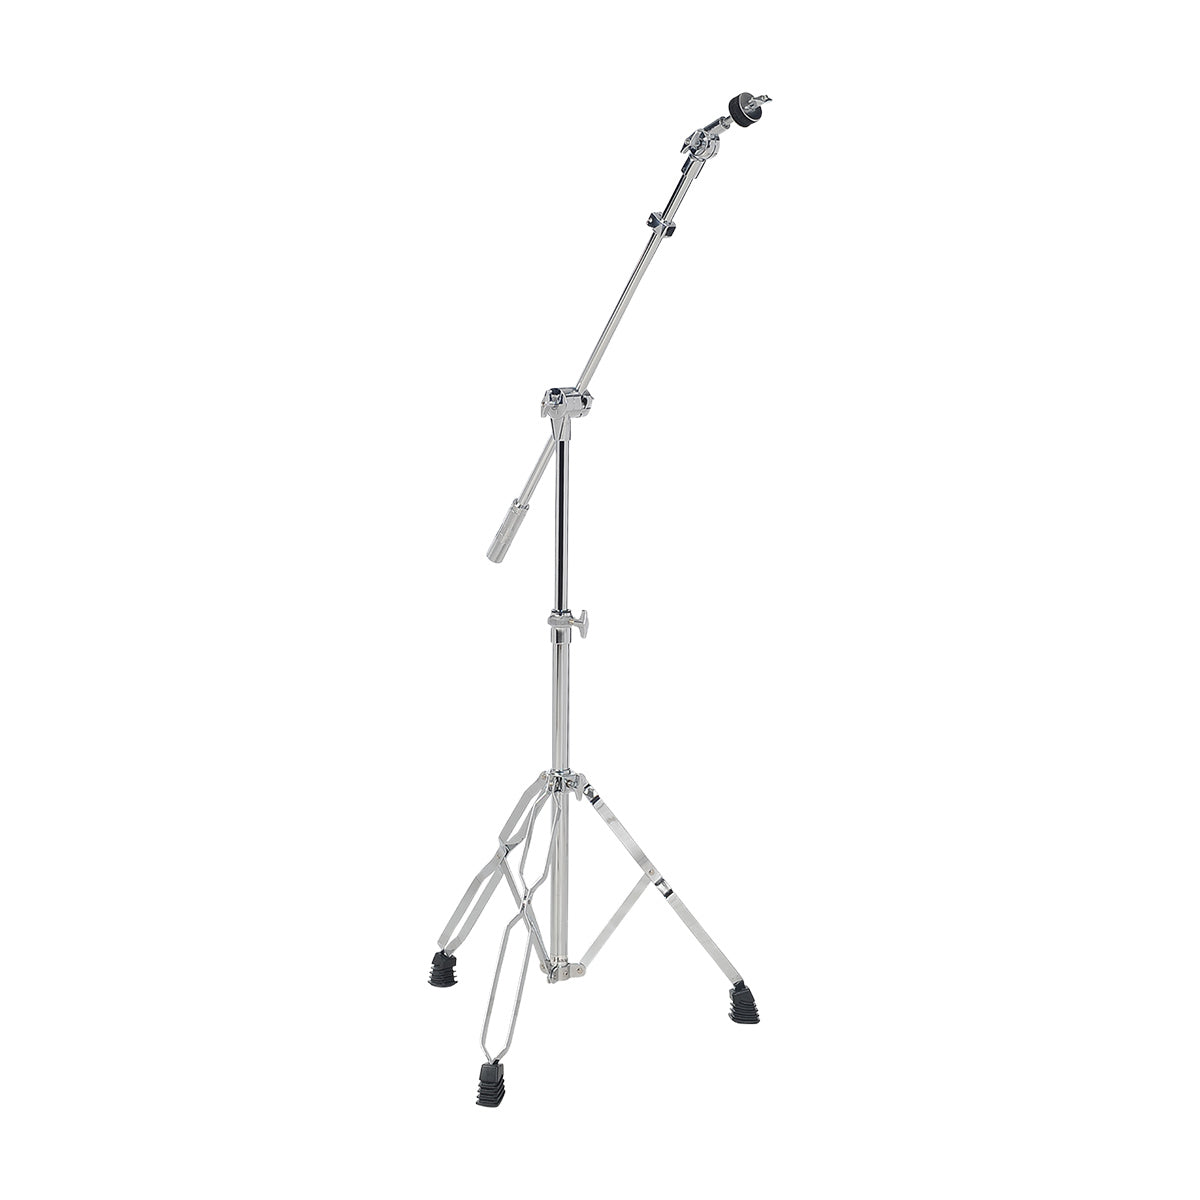 HAVANA 110-3E Cymbal Stand for Drum